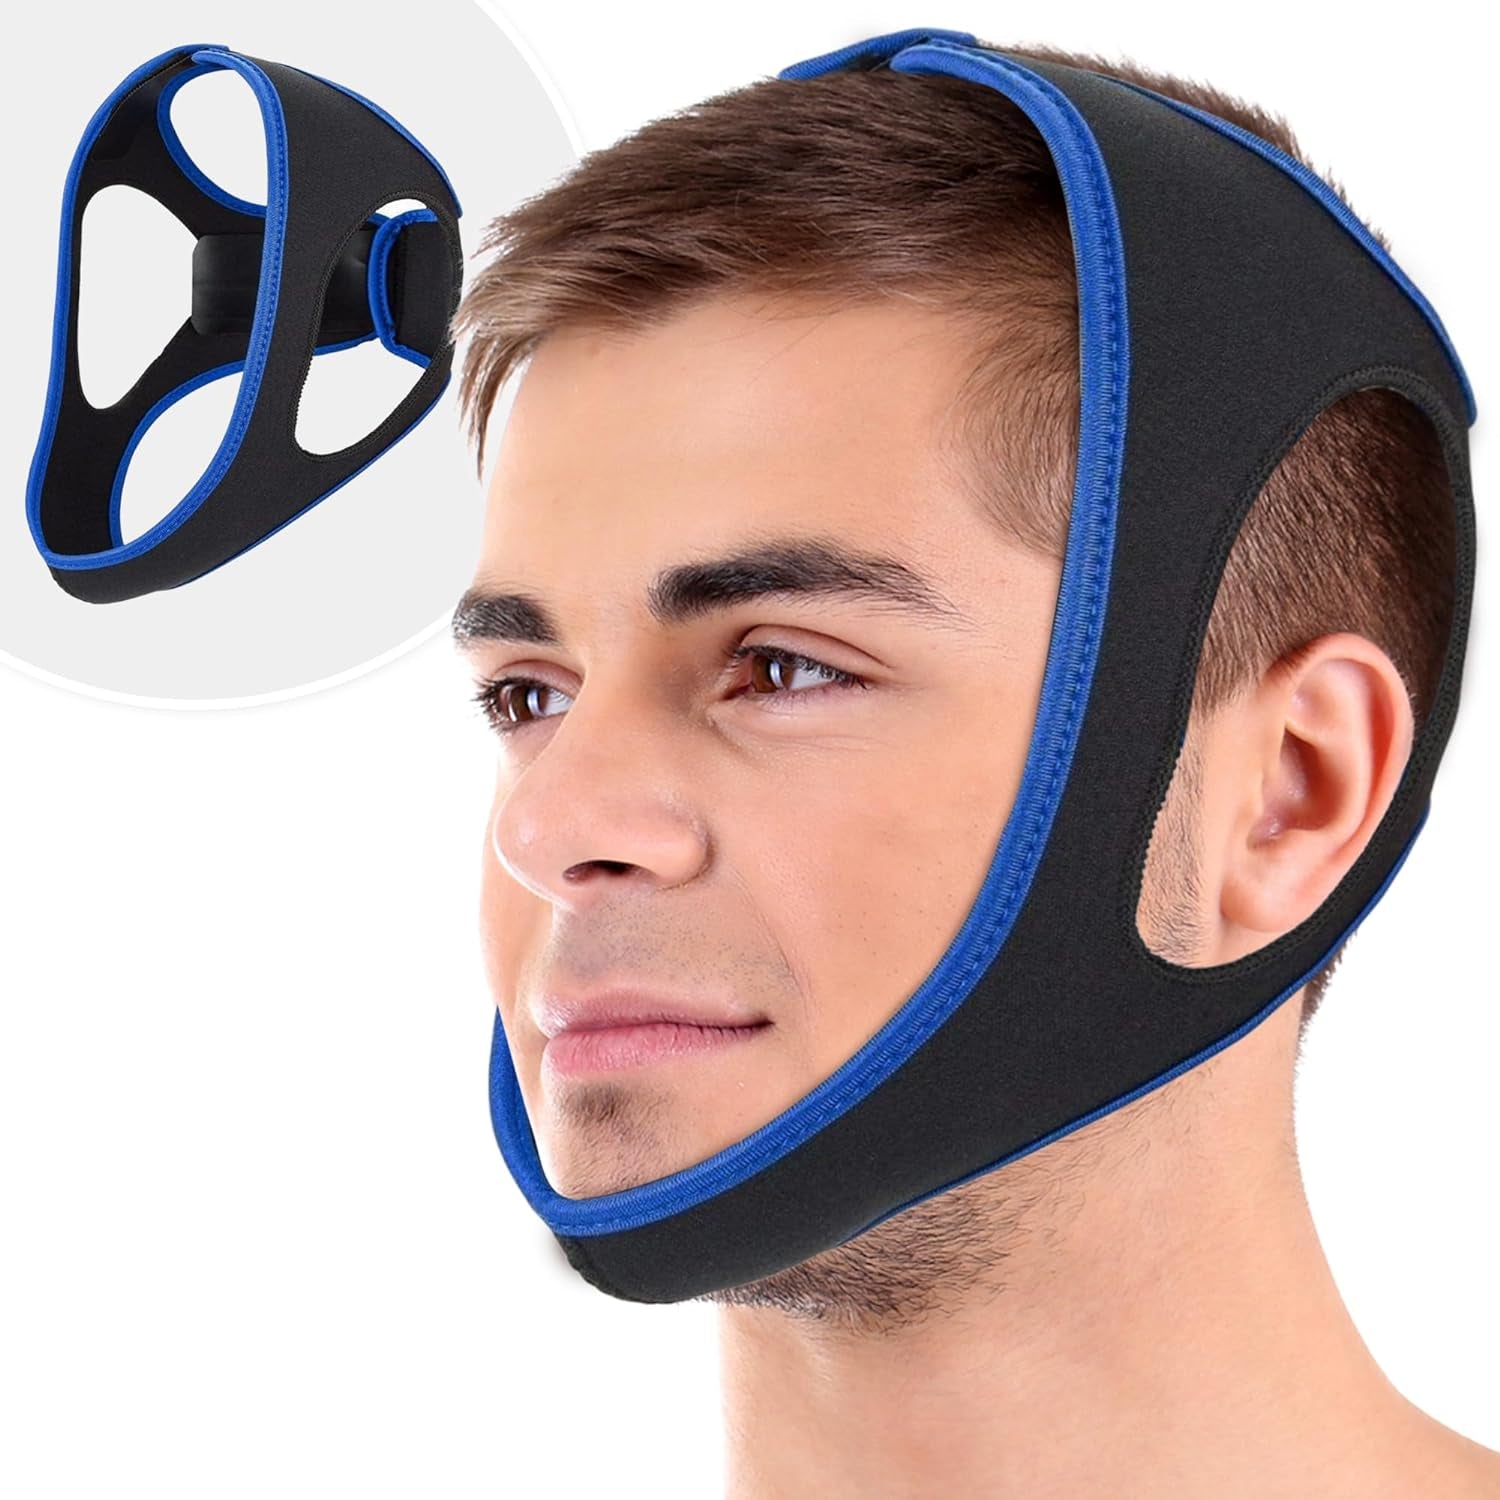 Adjustable anti Snore Chin Strap for Effective Snoring Solution - Breathable CPAP Alternative - Unisex, Chin Strap for Snoring